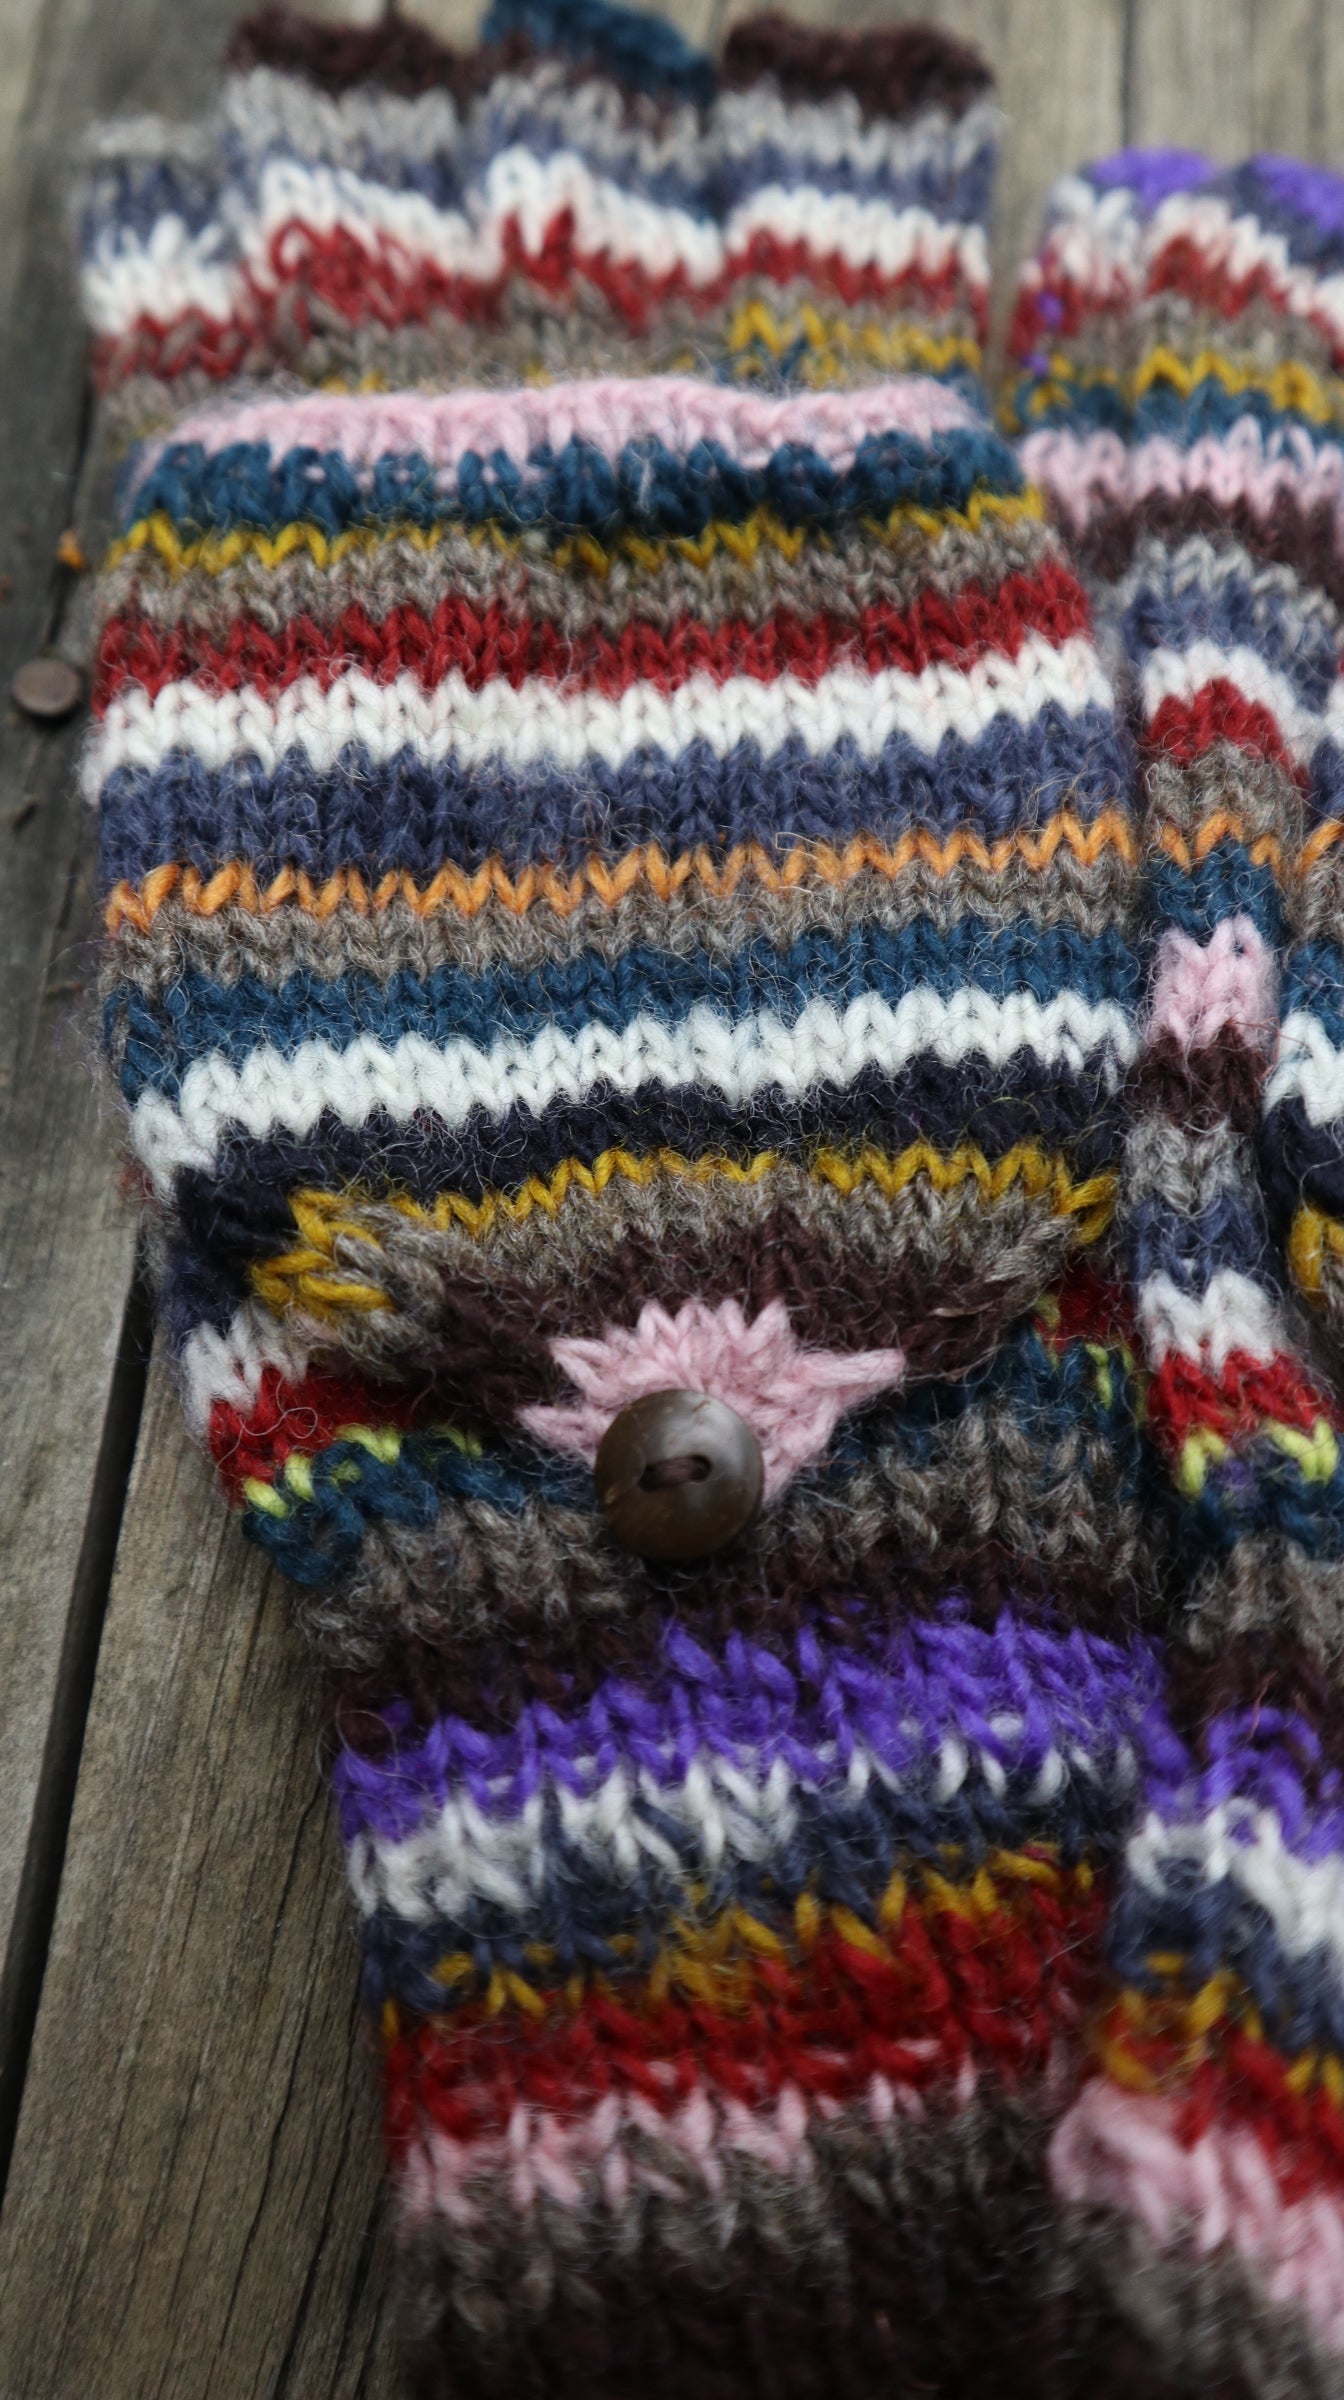 Fair Trade Ethical Adult Fingerless Gloves with Cap in Striped Brown Designs